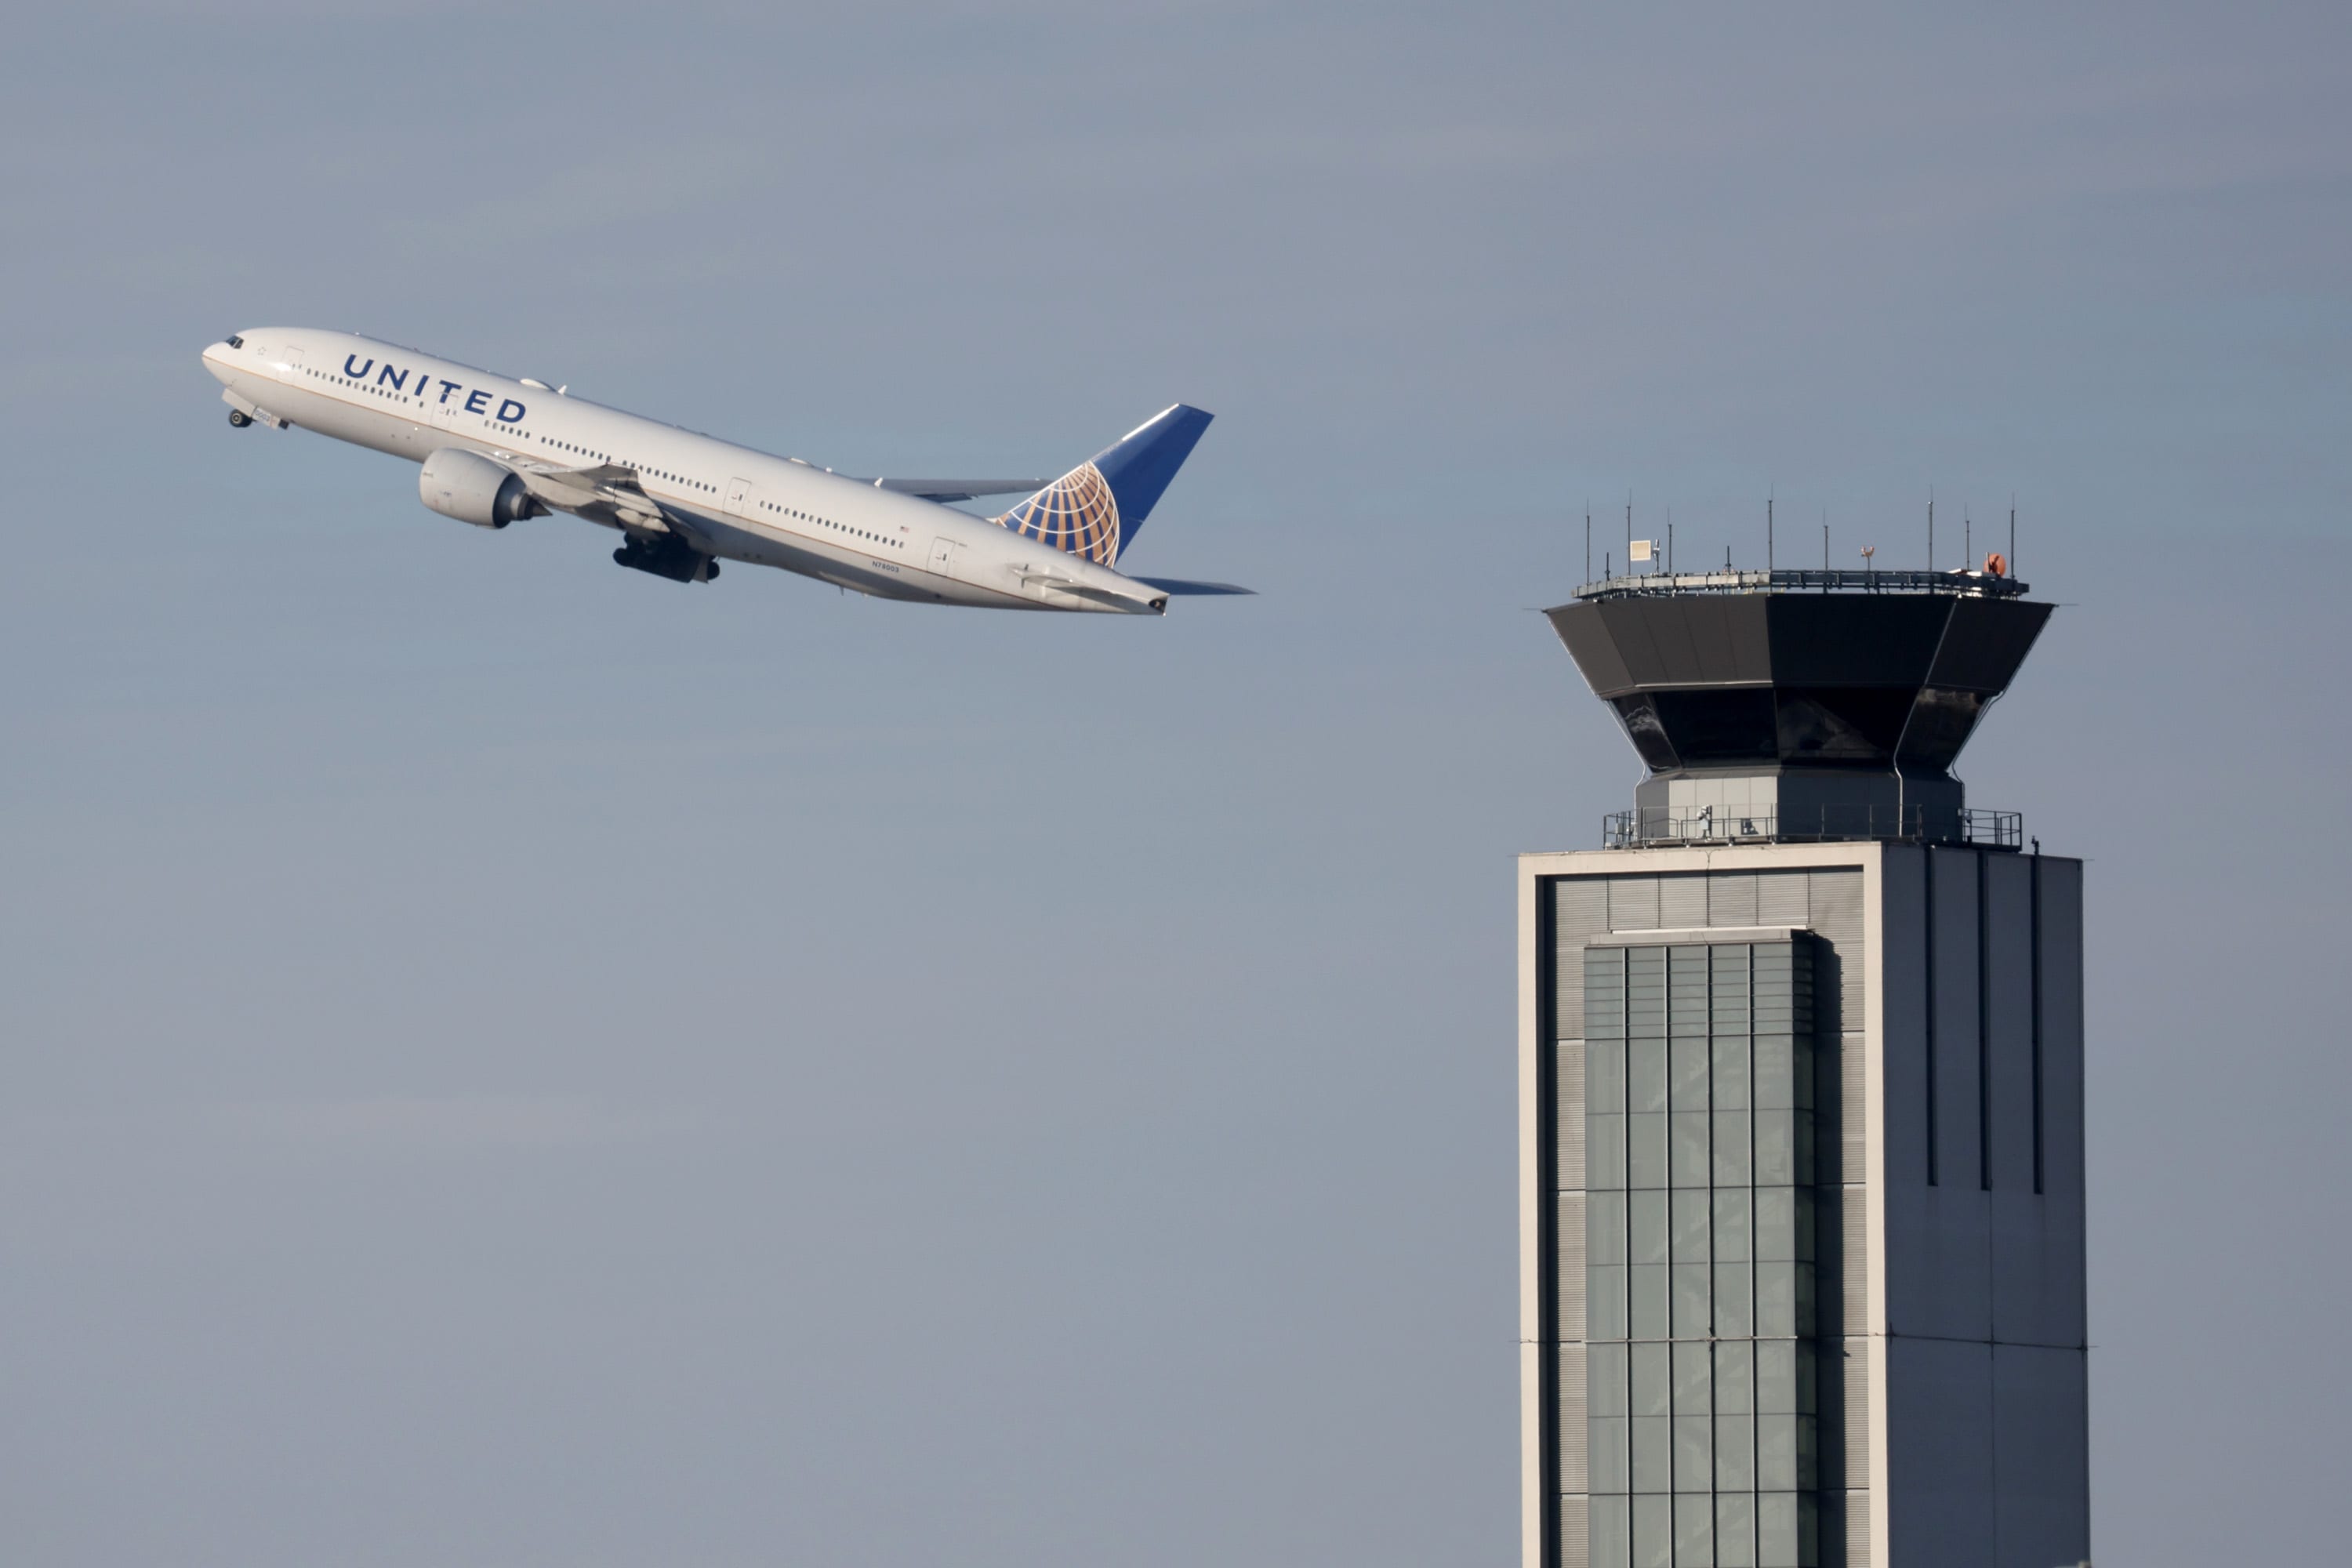 United warns omicron will delay travel recovery, drive up costs